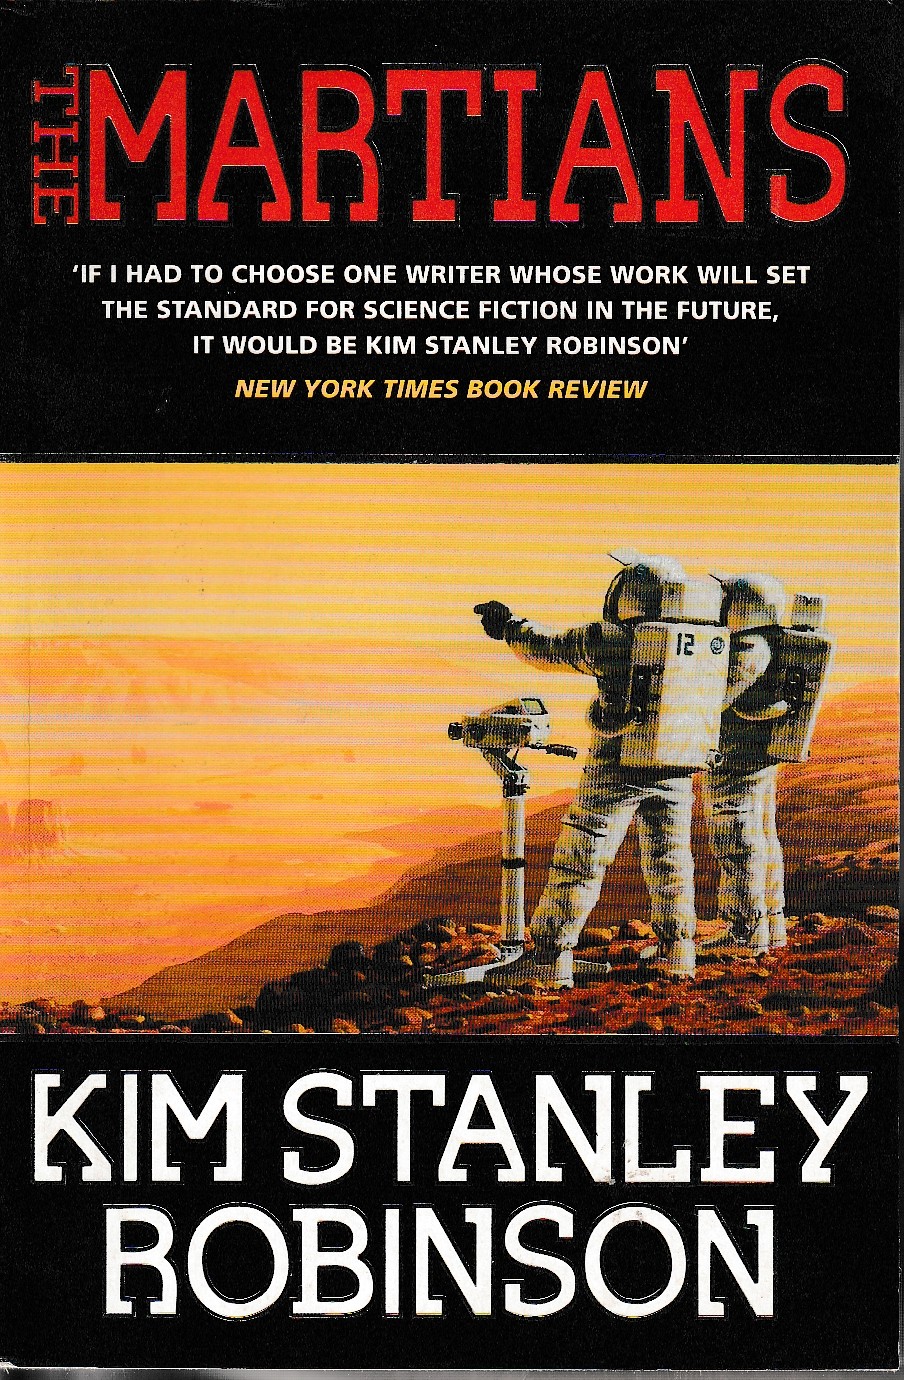 Kim Stanley Robinson  THE MARTIANS front book cover image